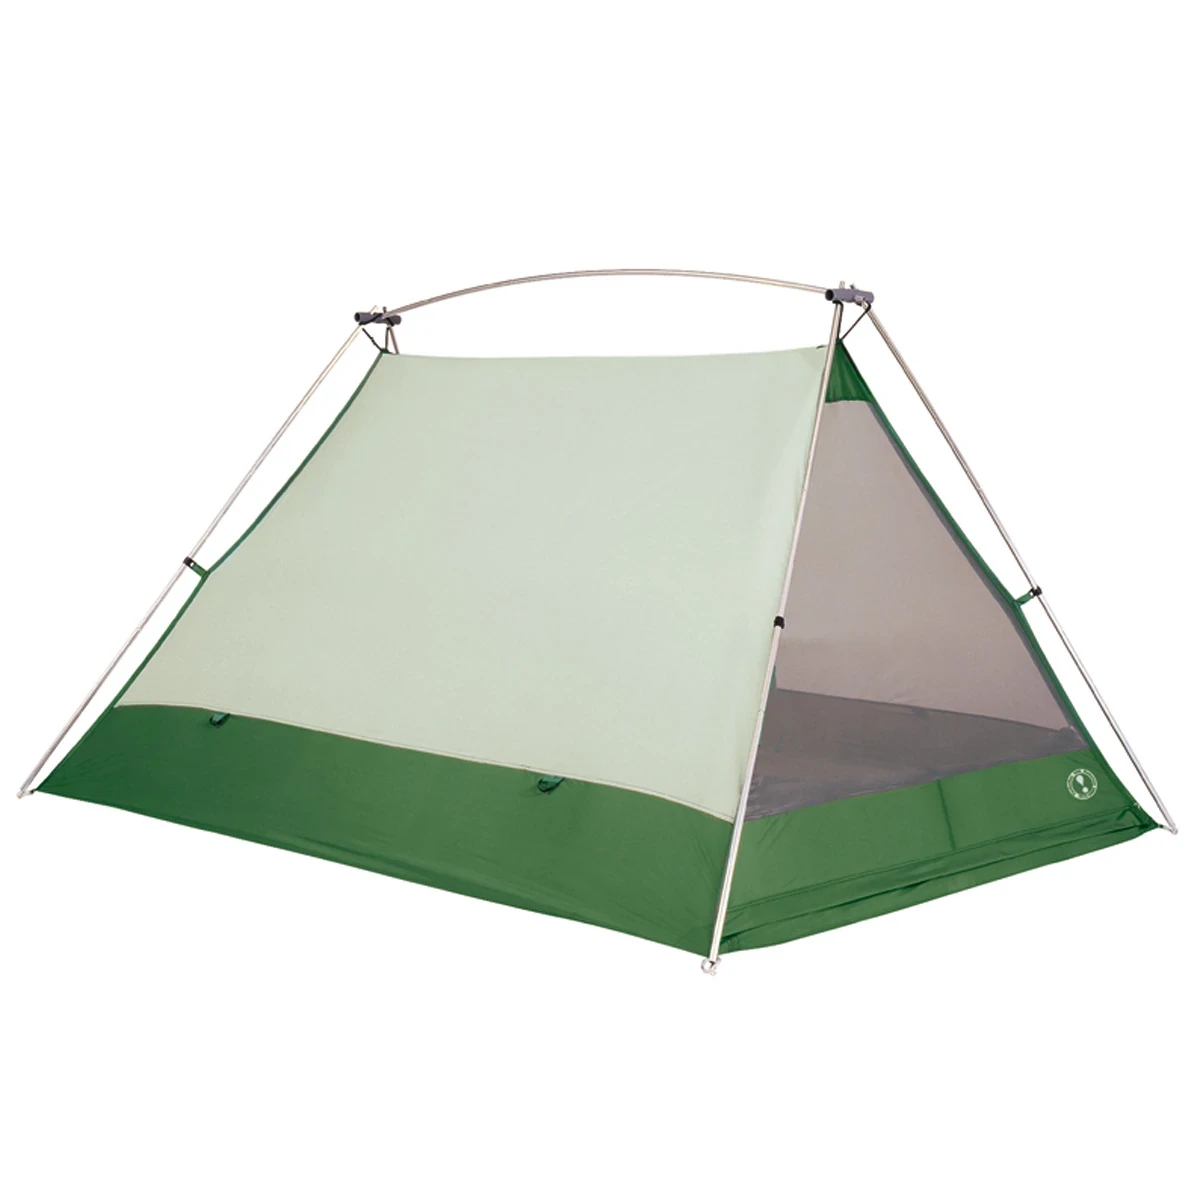 Timberline tent without rainfly